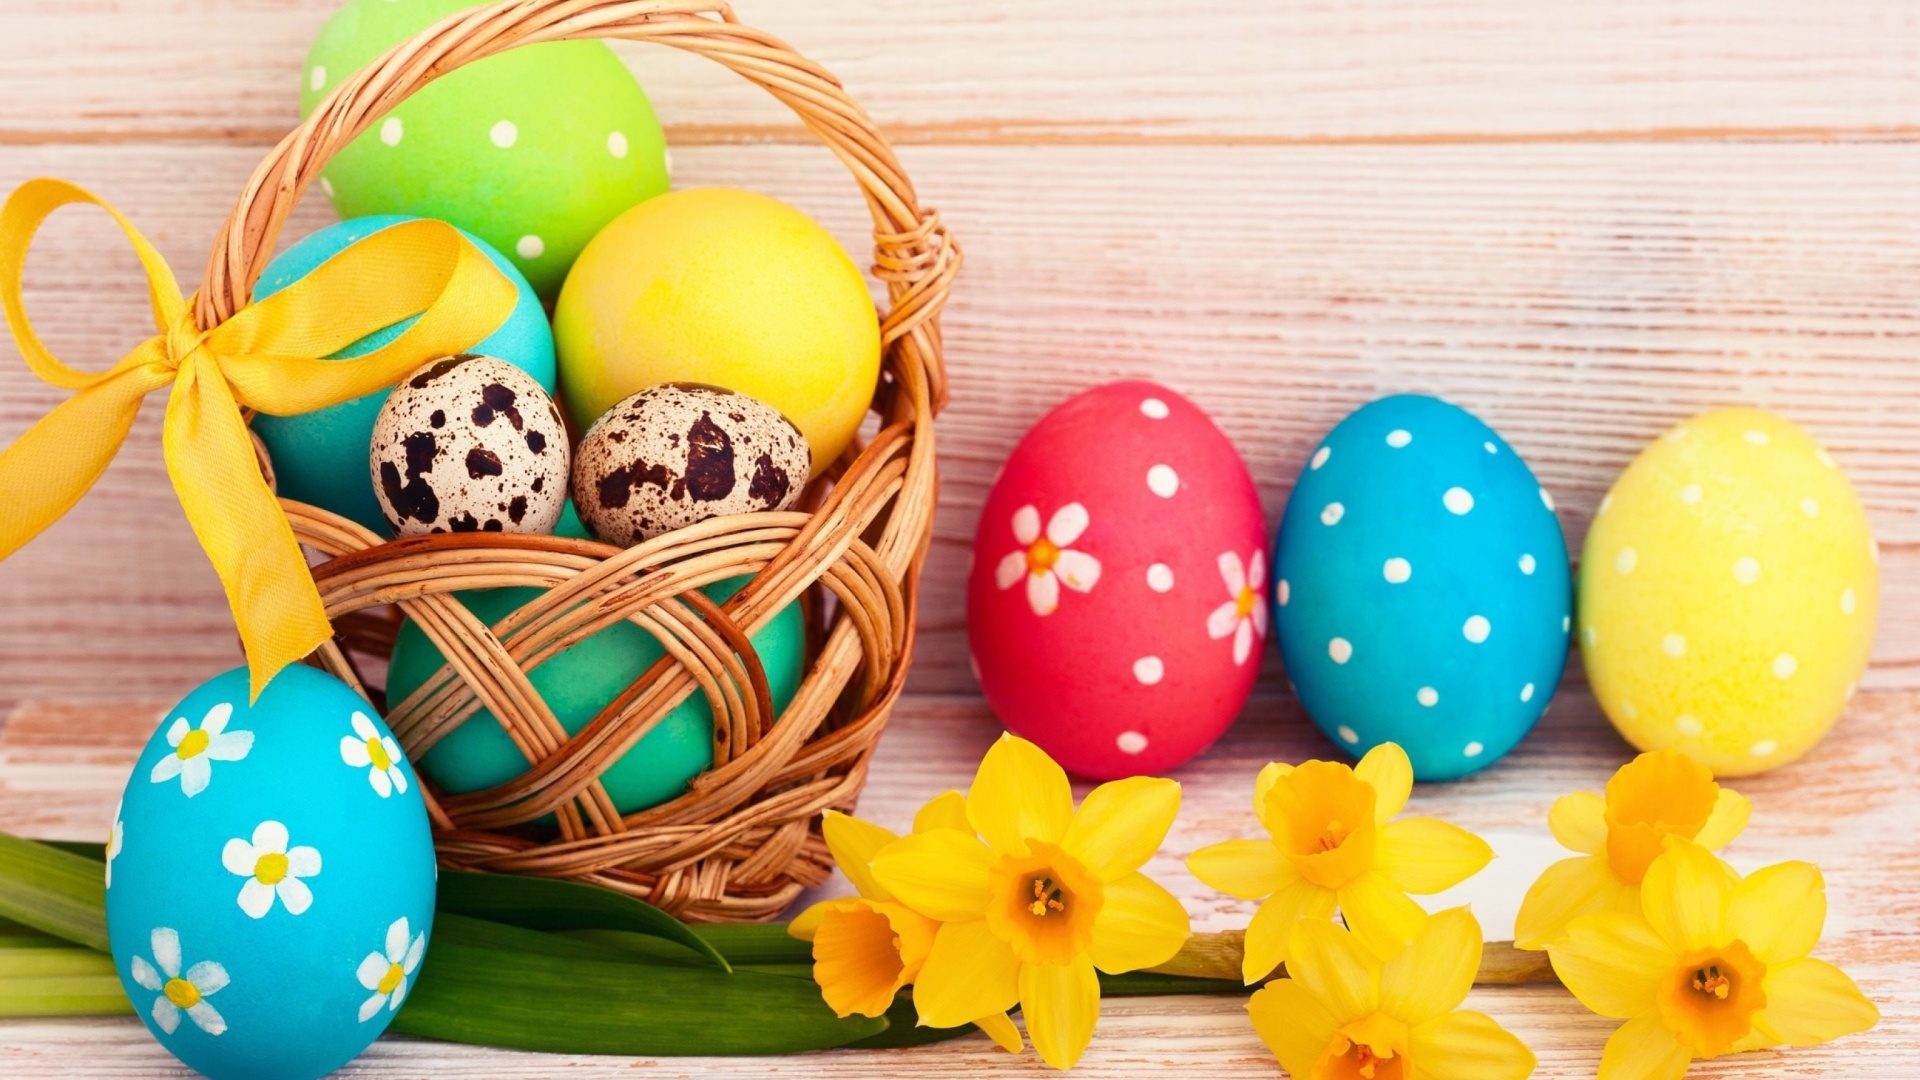 Easter Spring Daffodils Flowers and Eggs Decorations screenshot #1 1920x1080